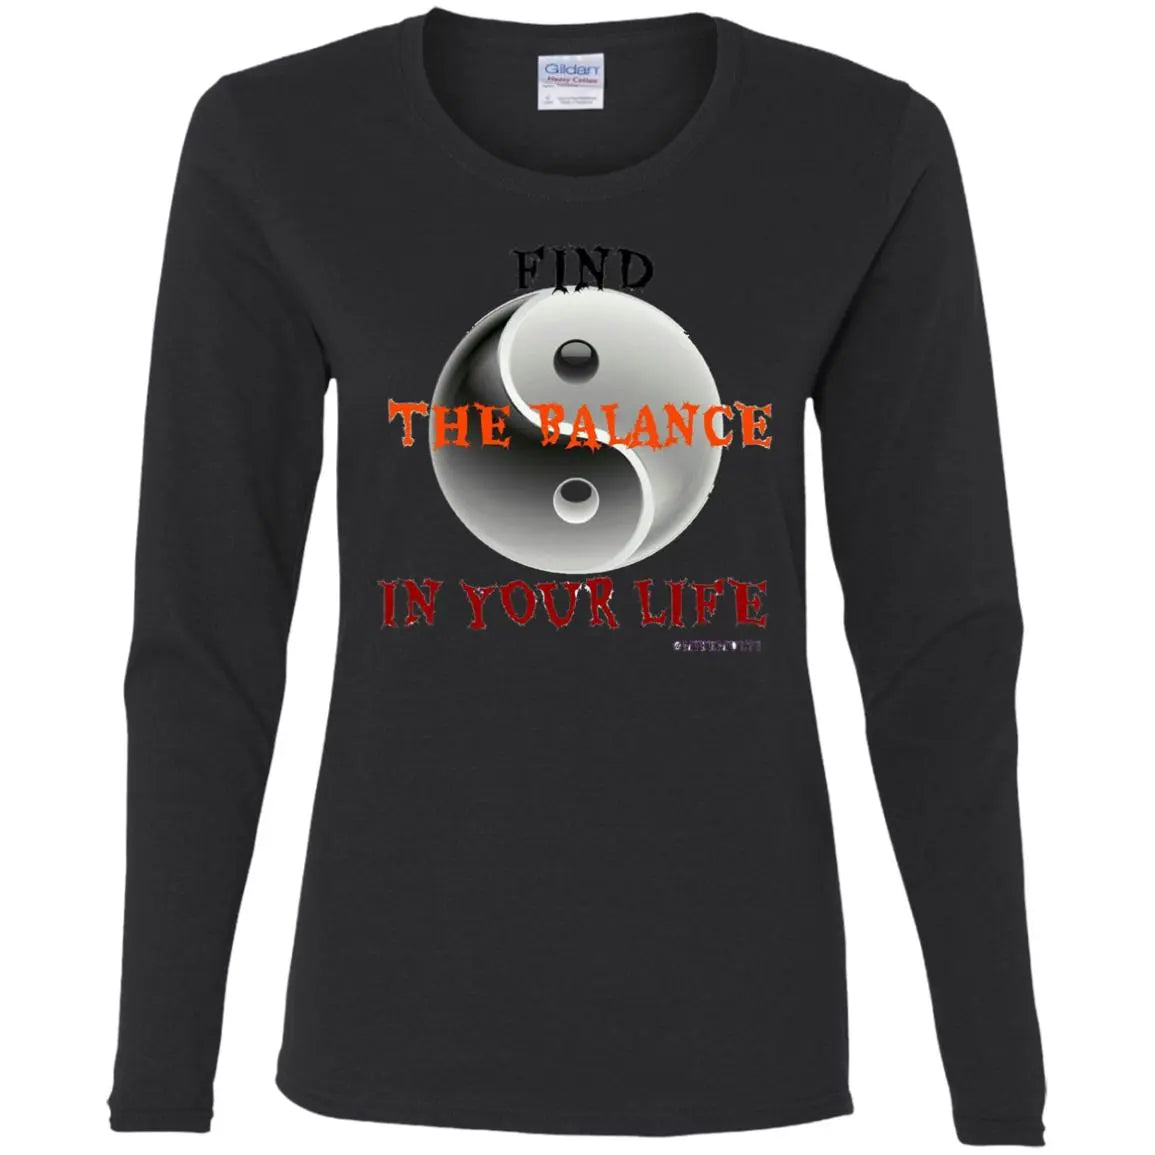 Find The Balance In Your Life - Ladies' Cotton LS T-Shirt CustomCat